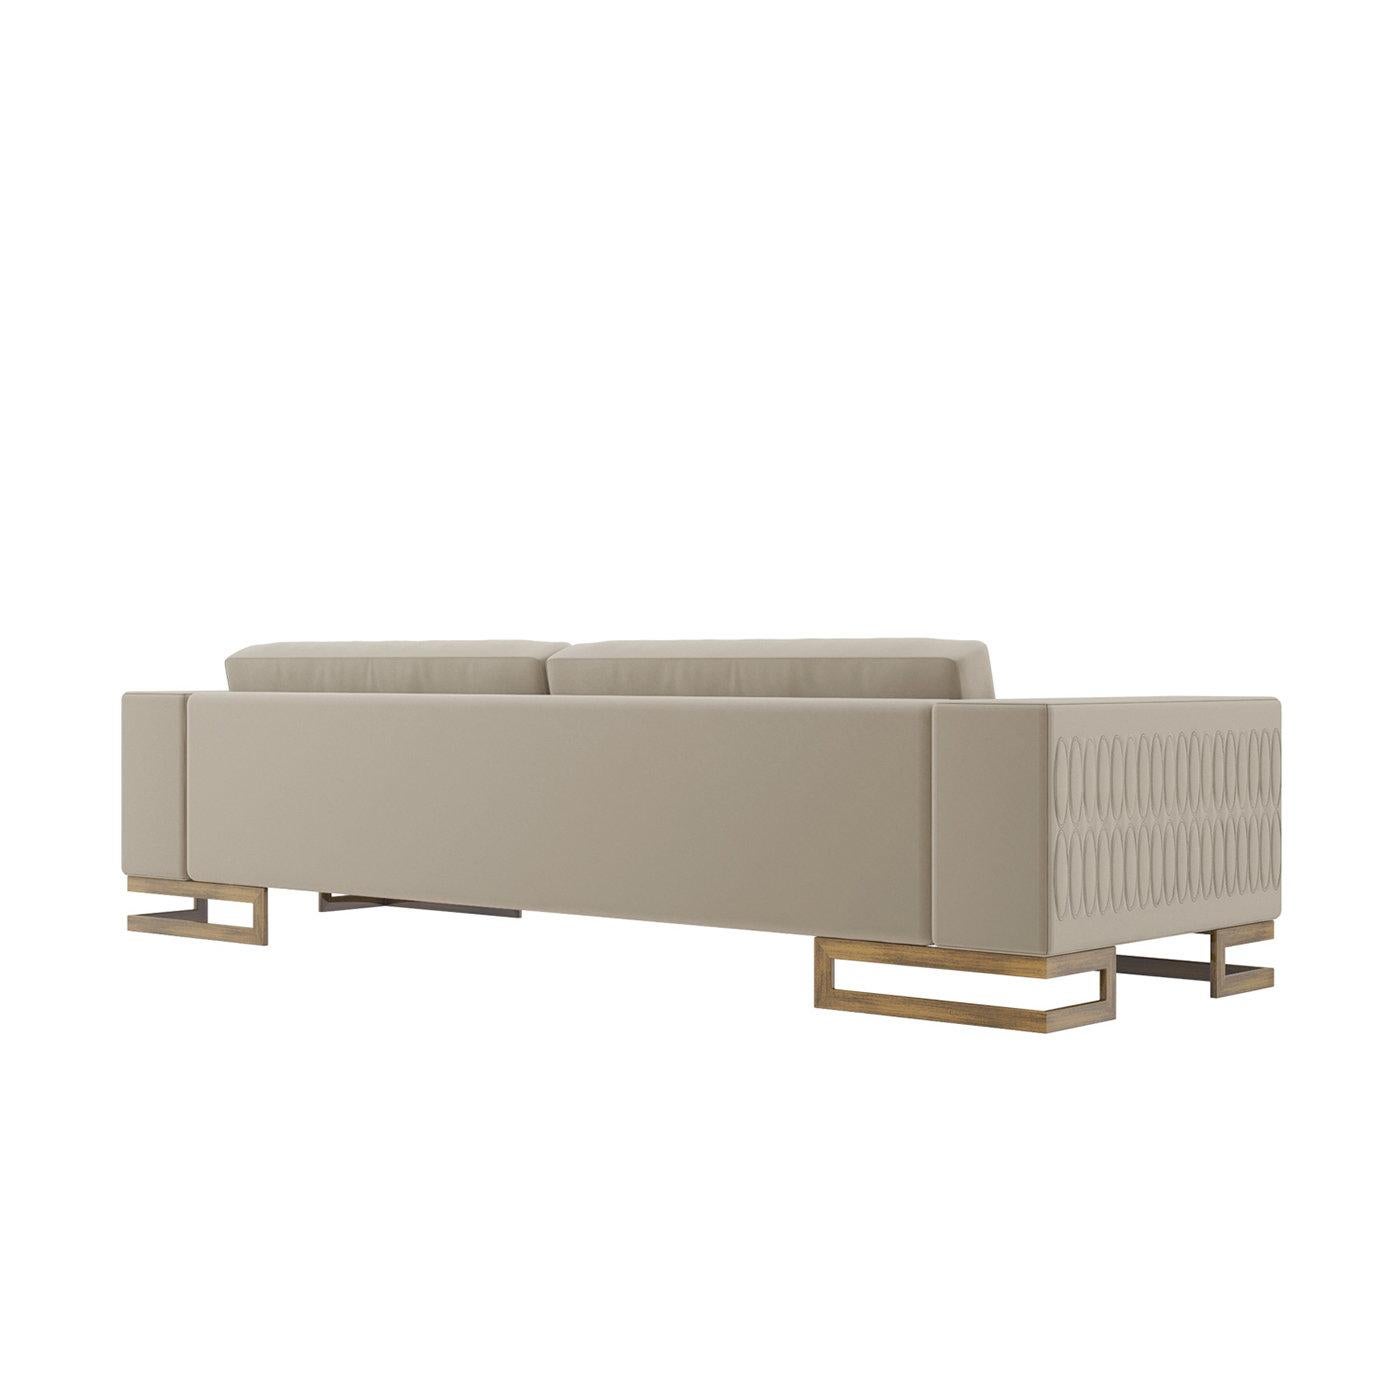 This sophisticated three-seater sofa is defined by sleek geometric lines, boasting a sturdy multi-layer frame crafted from poplar and spruce. Its waterproof and stain-proof beige velvet upholstery is detailed with oval-shaped quilting on the arms,